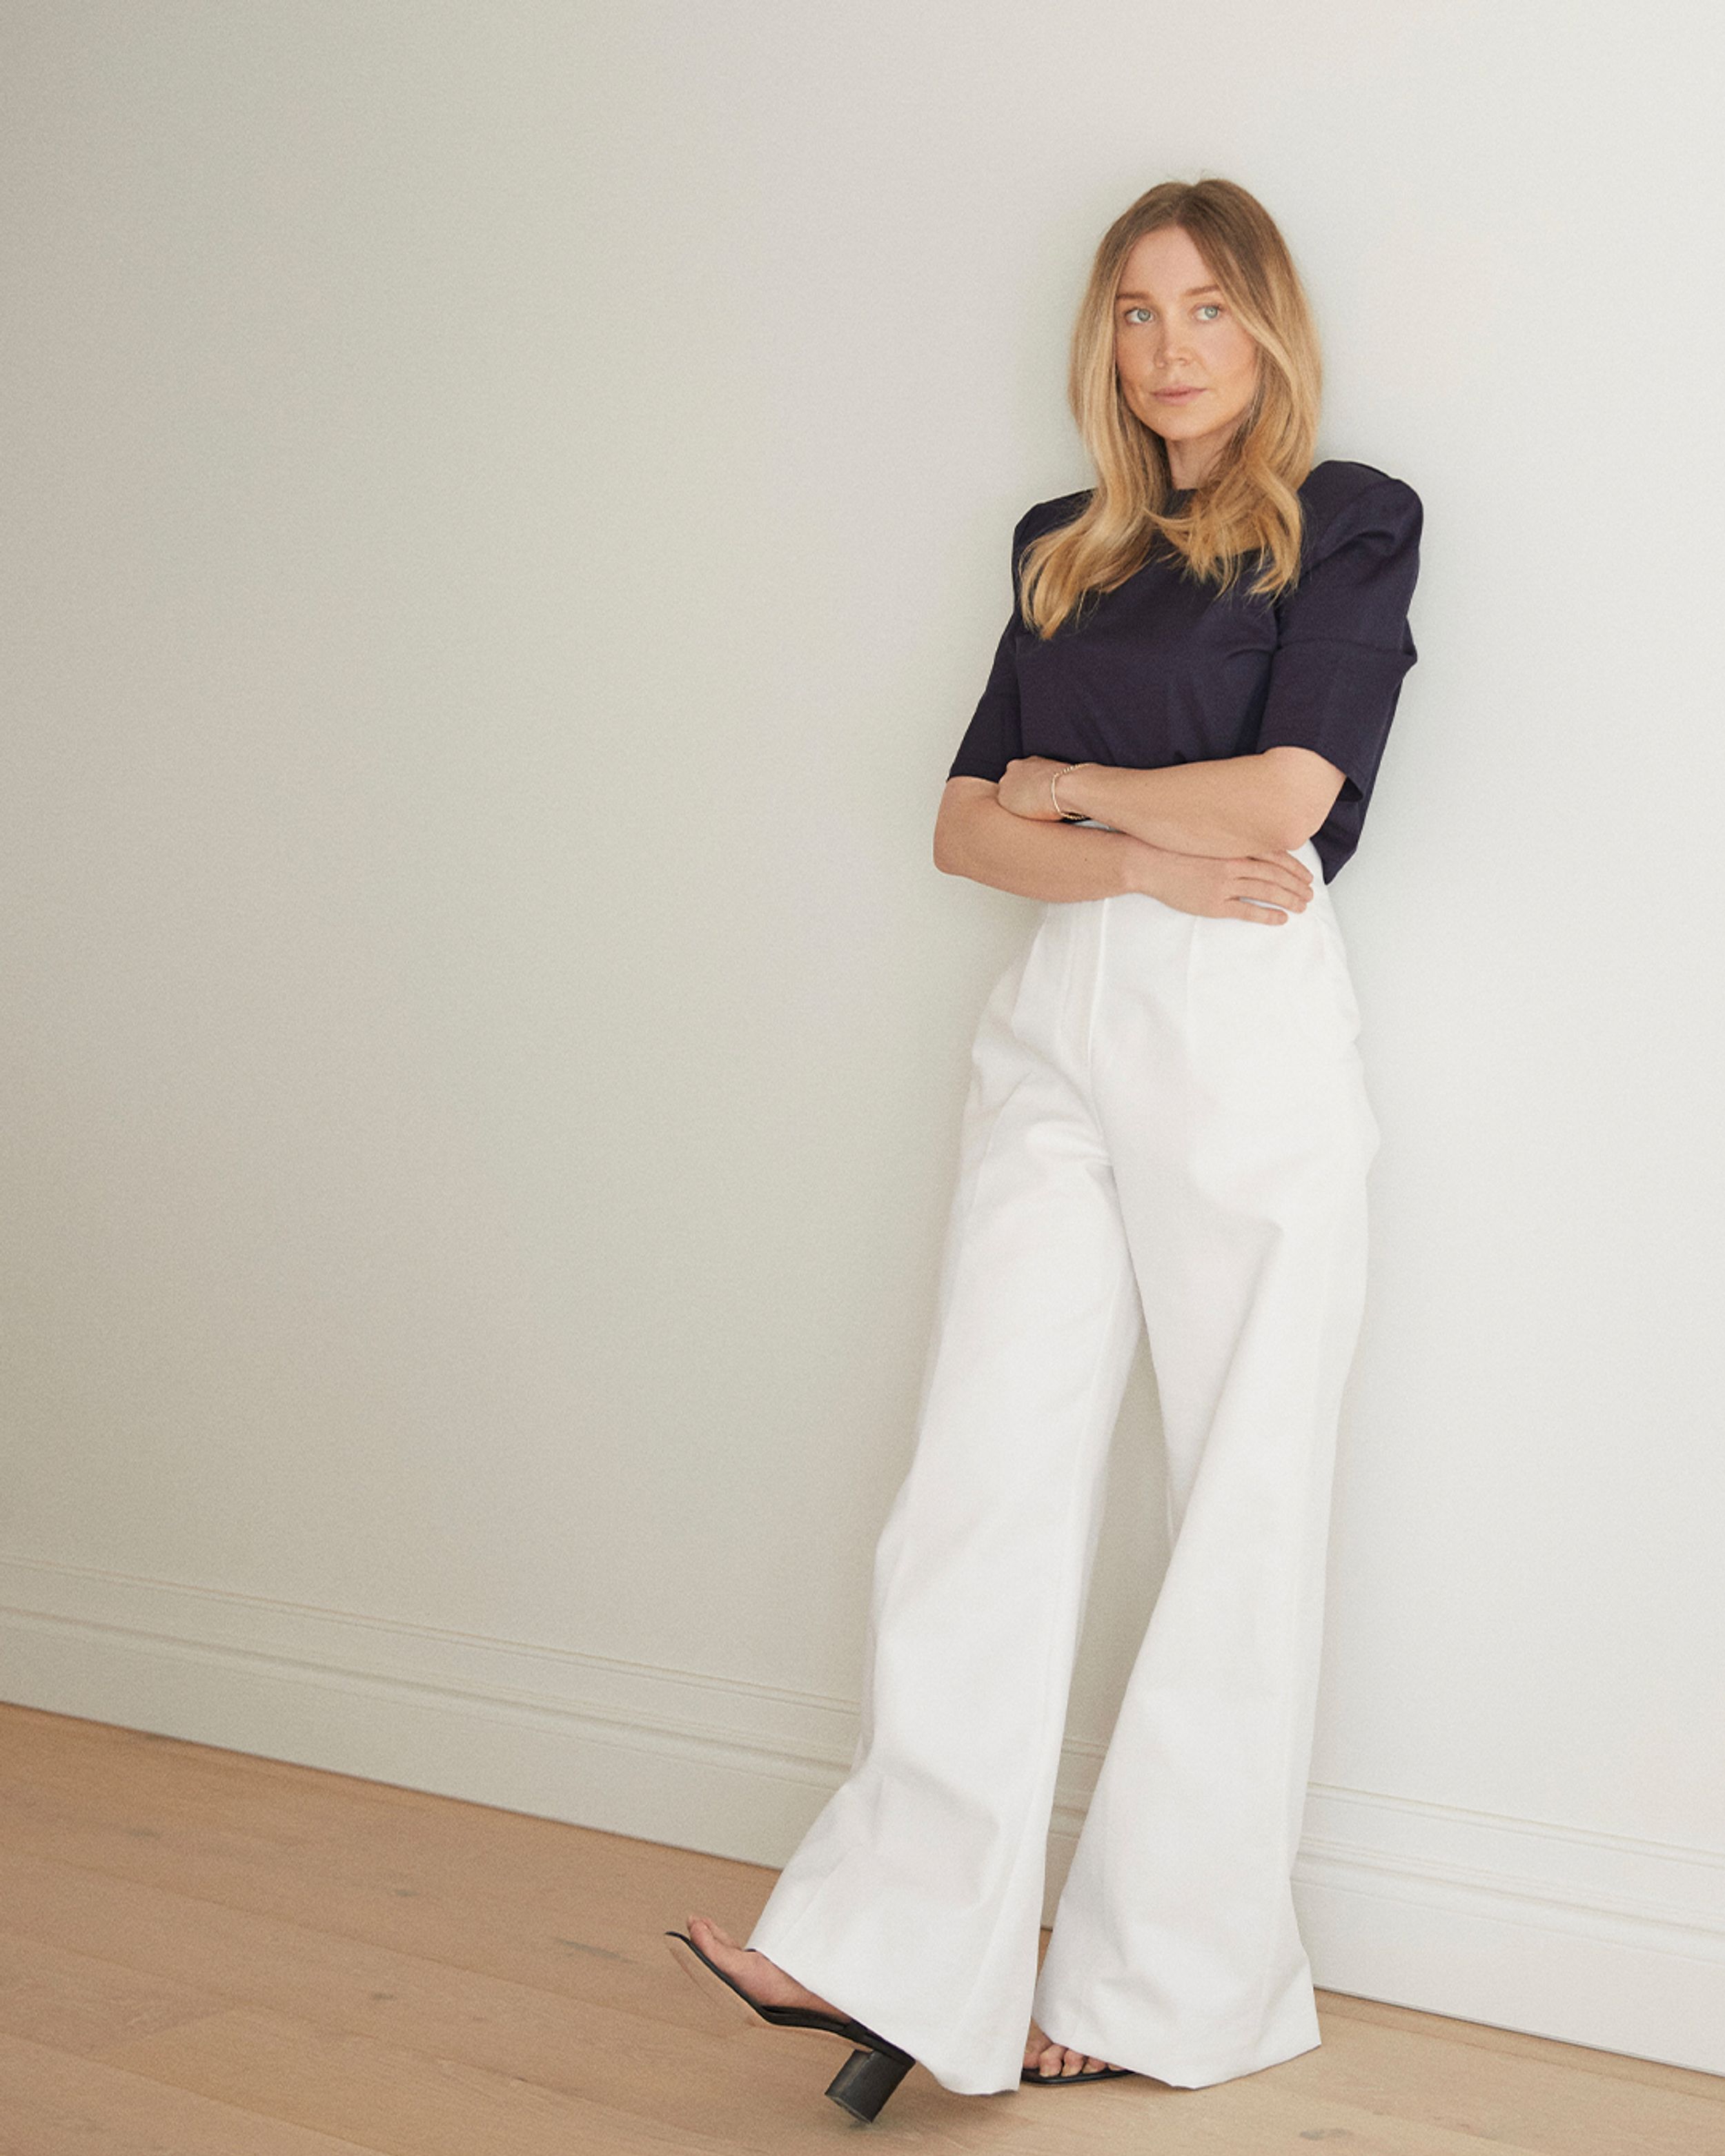 Hayley Bonham with long blonde hair leaning on a wall and crossing her arms wearing a dark short sleeve t-shirt and wide long white trousers